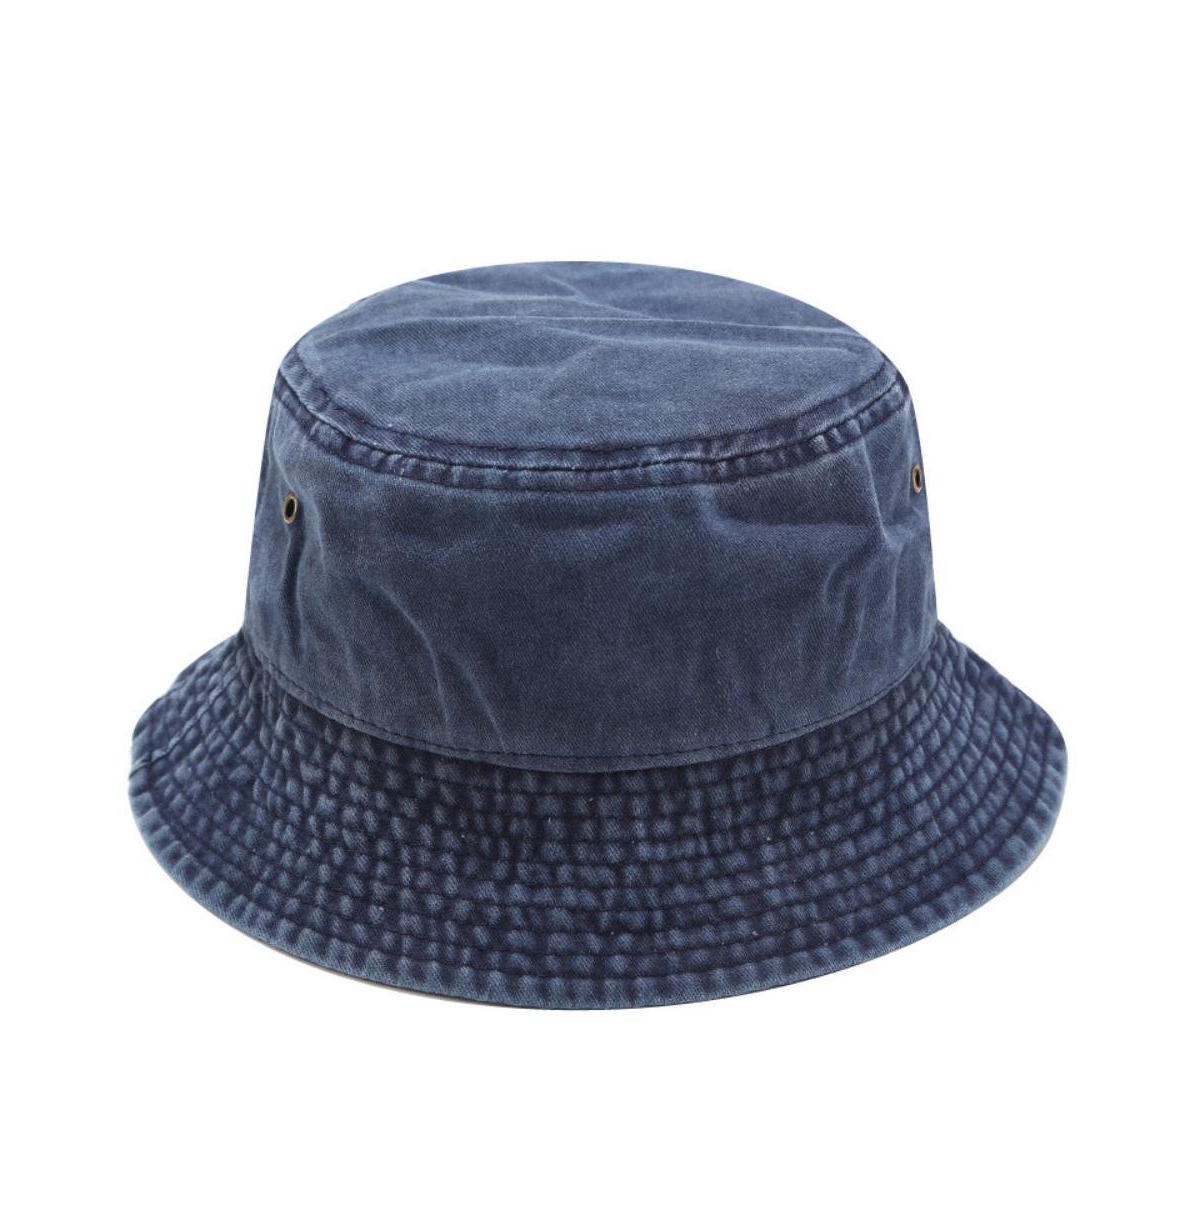 Unisex Washed Canvas Solid Color Bucket Hat - Wine